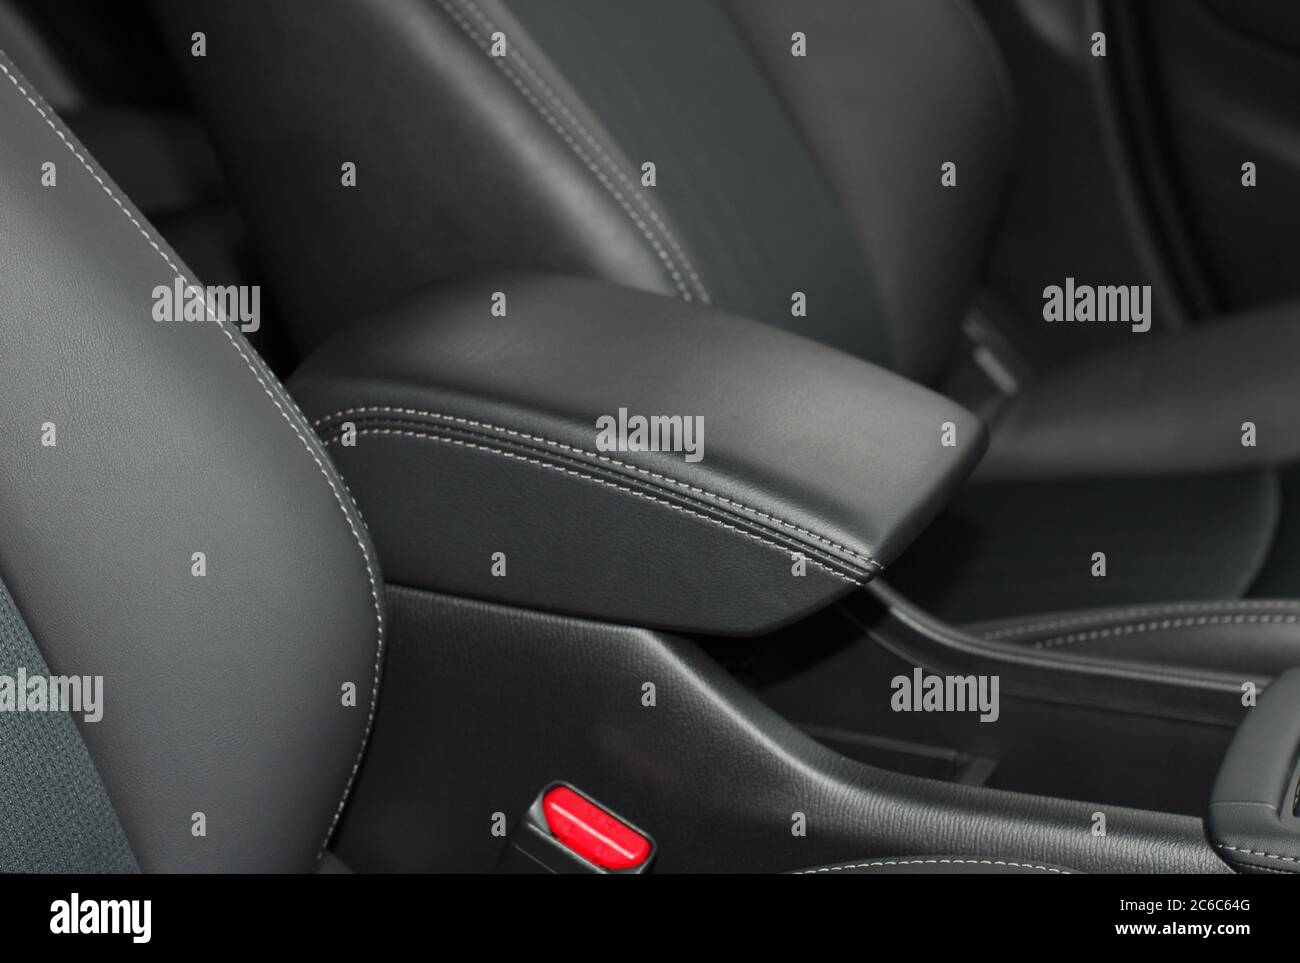 armrest in the luxury passenger car, front seats Stock Photo